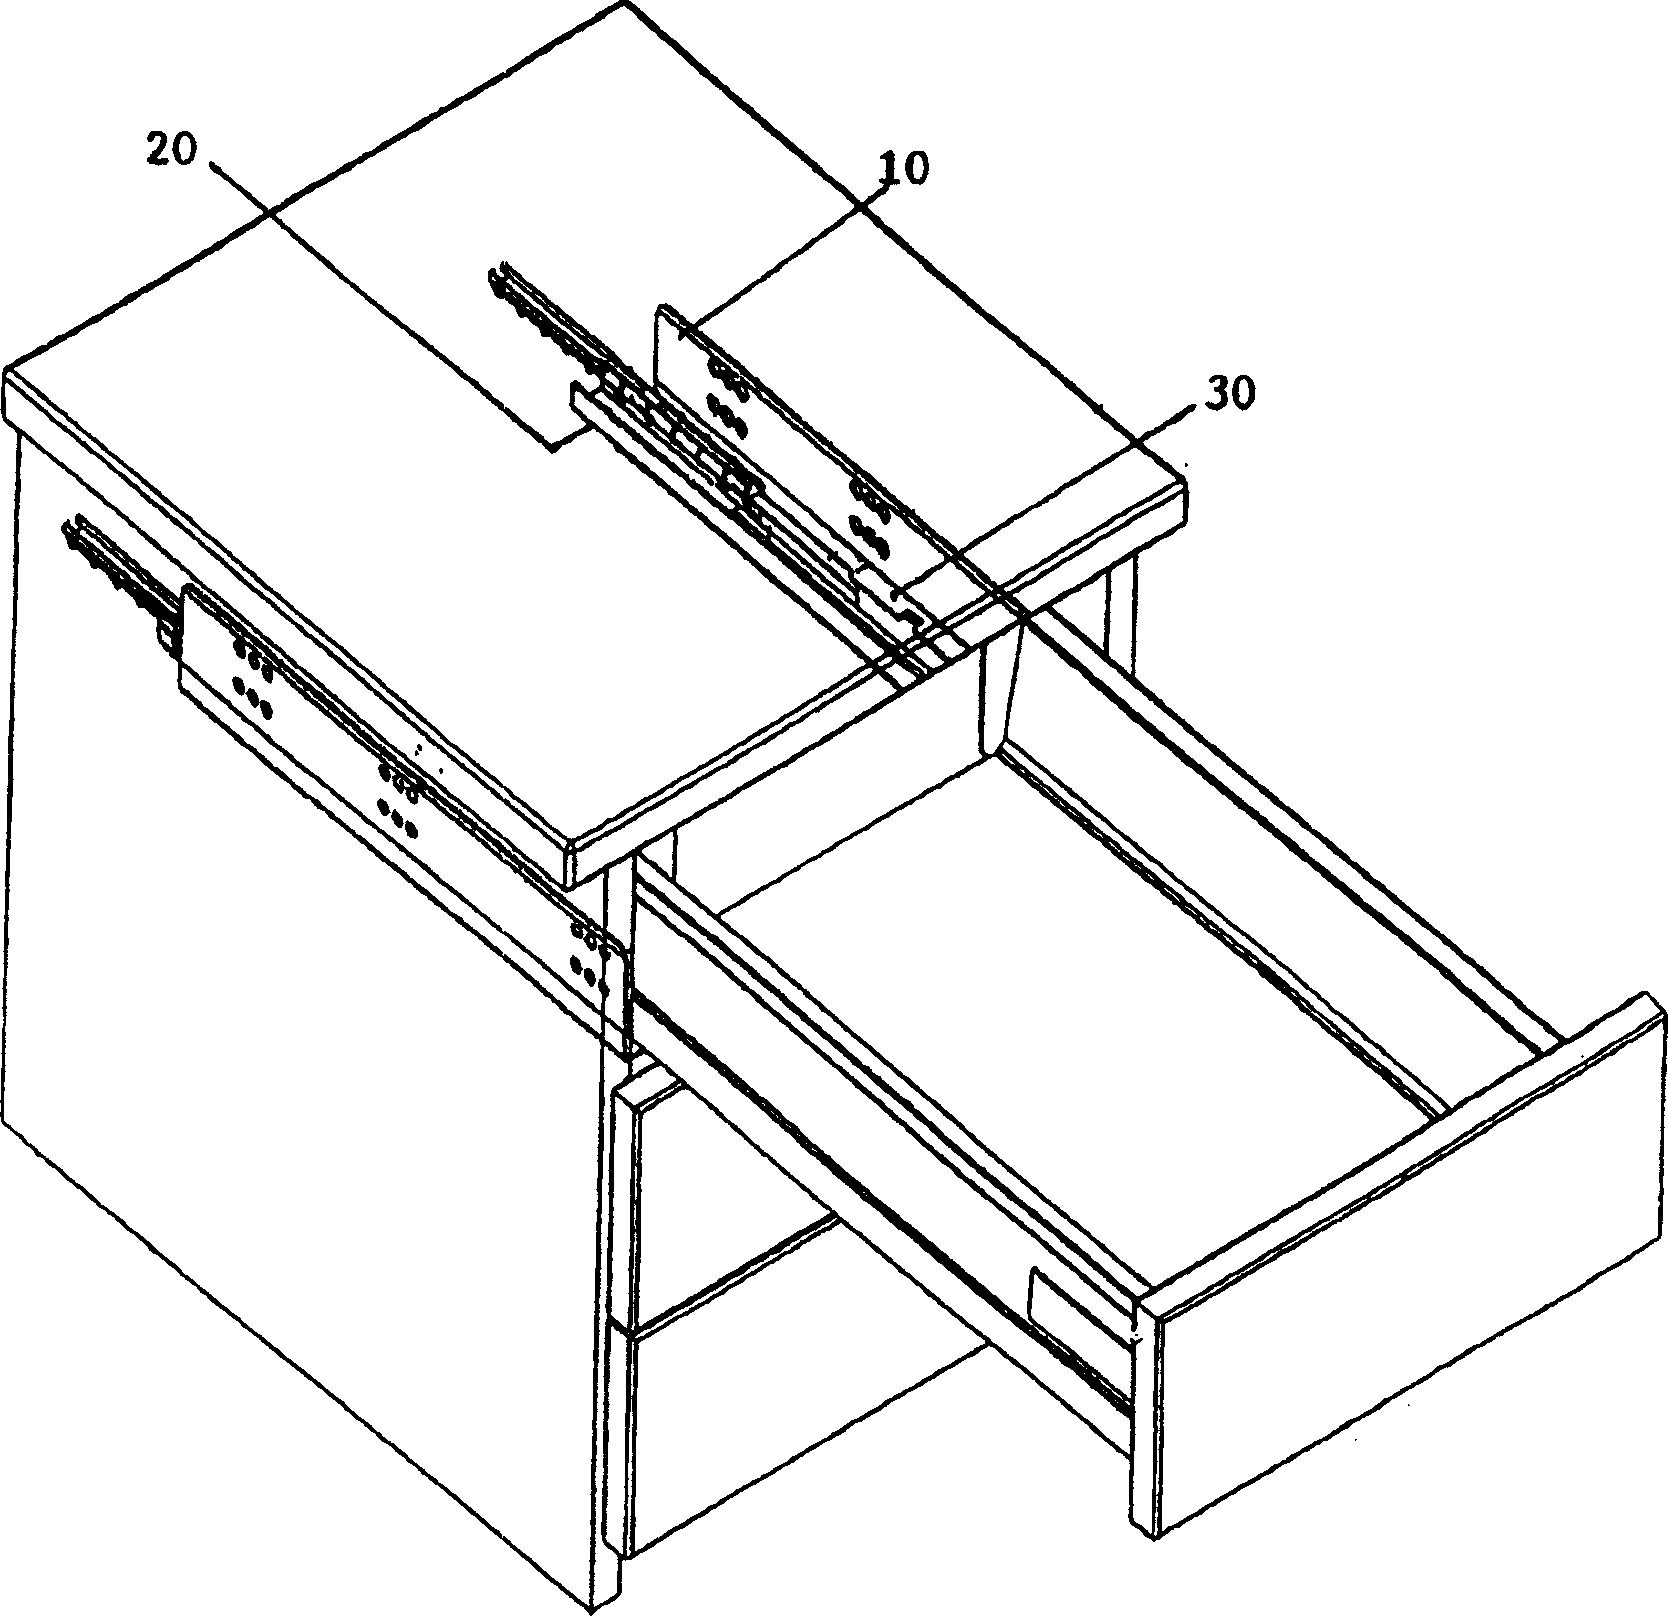 Drawer guide rail assembly